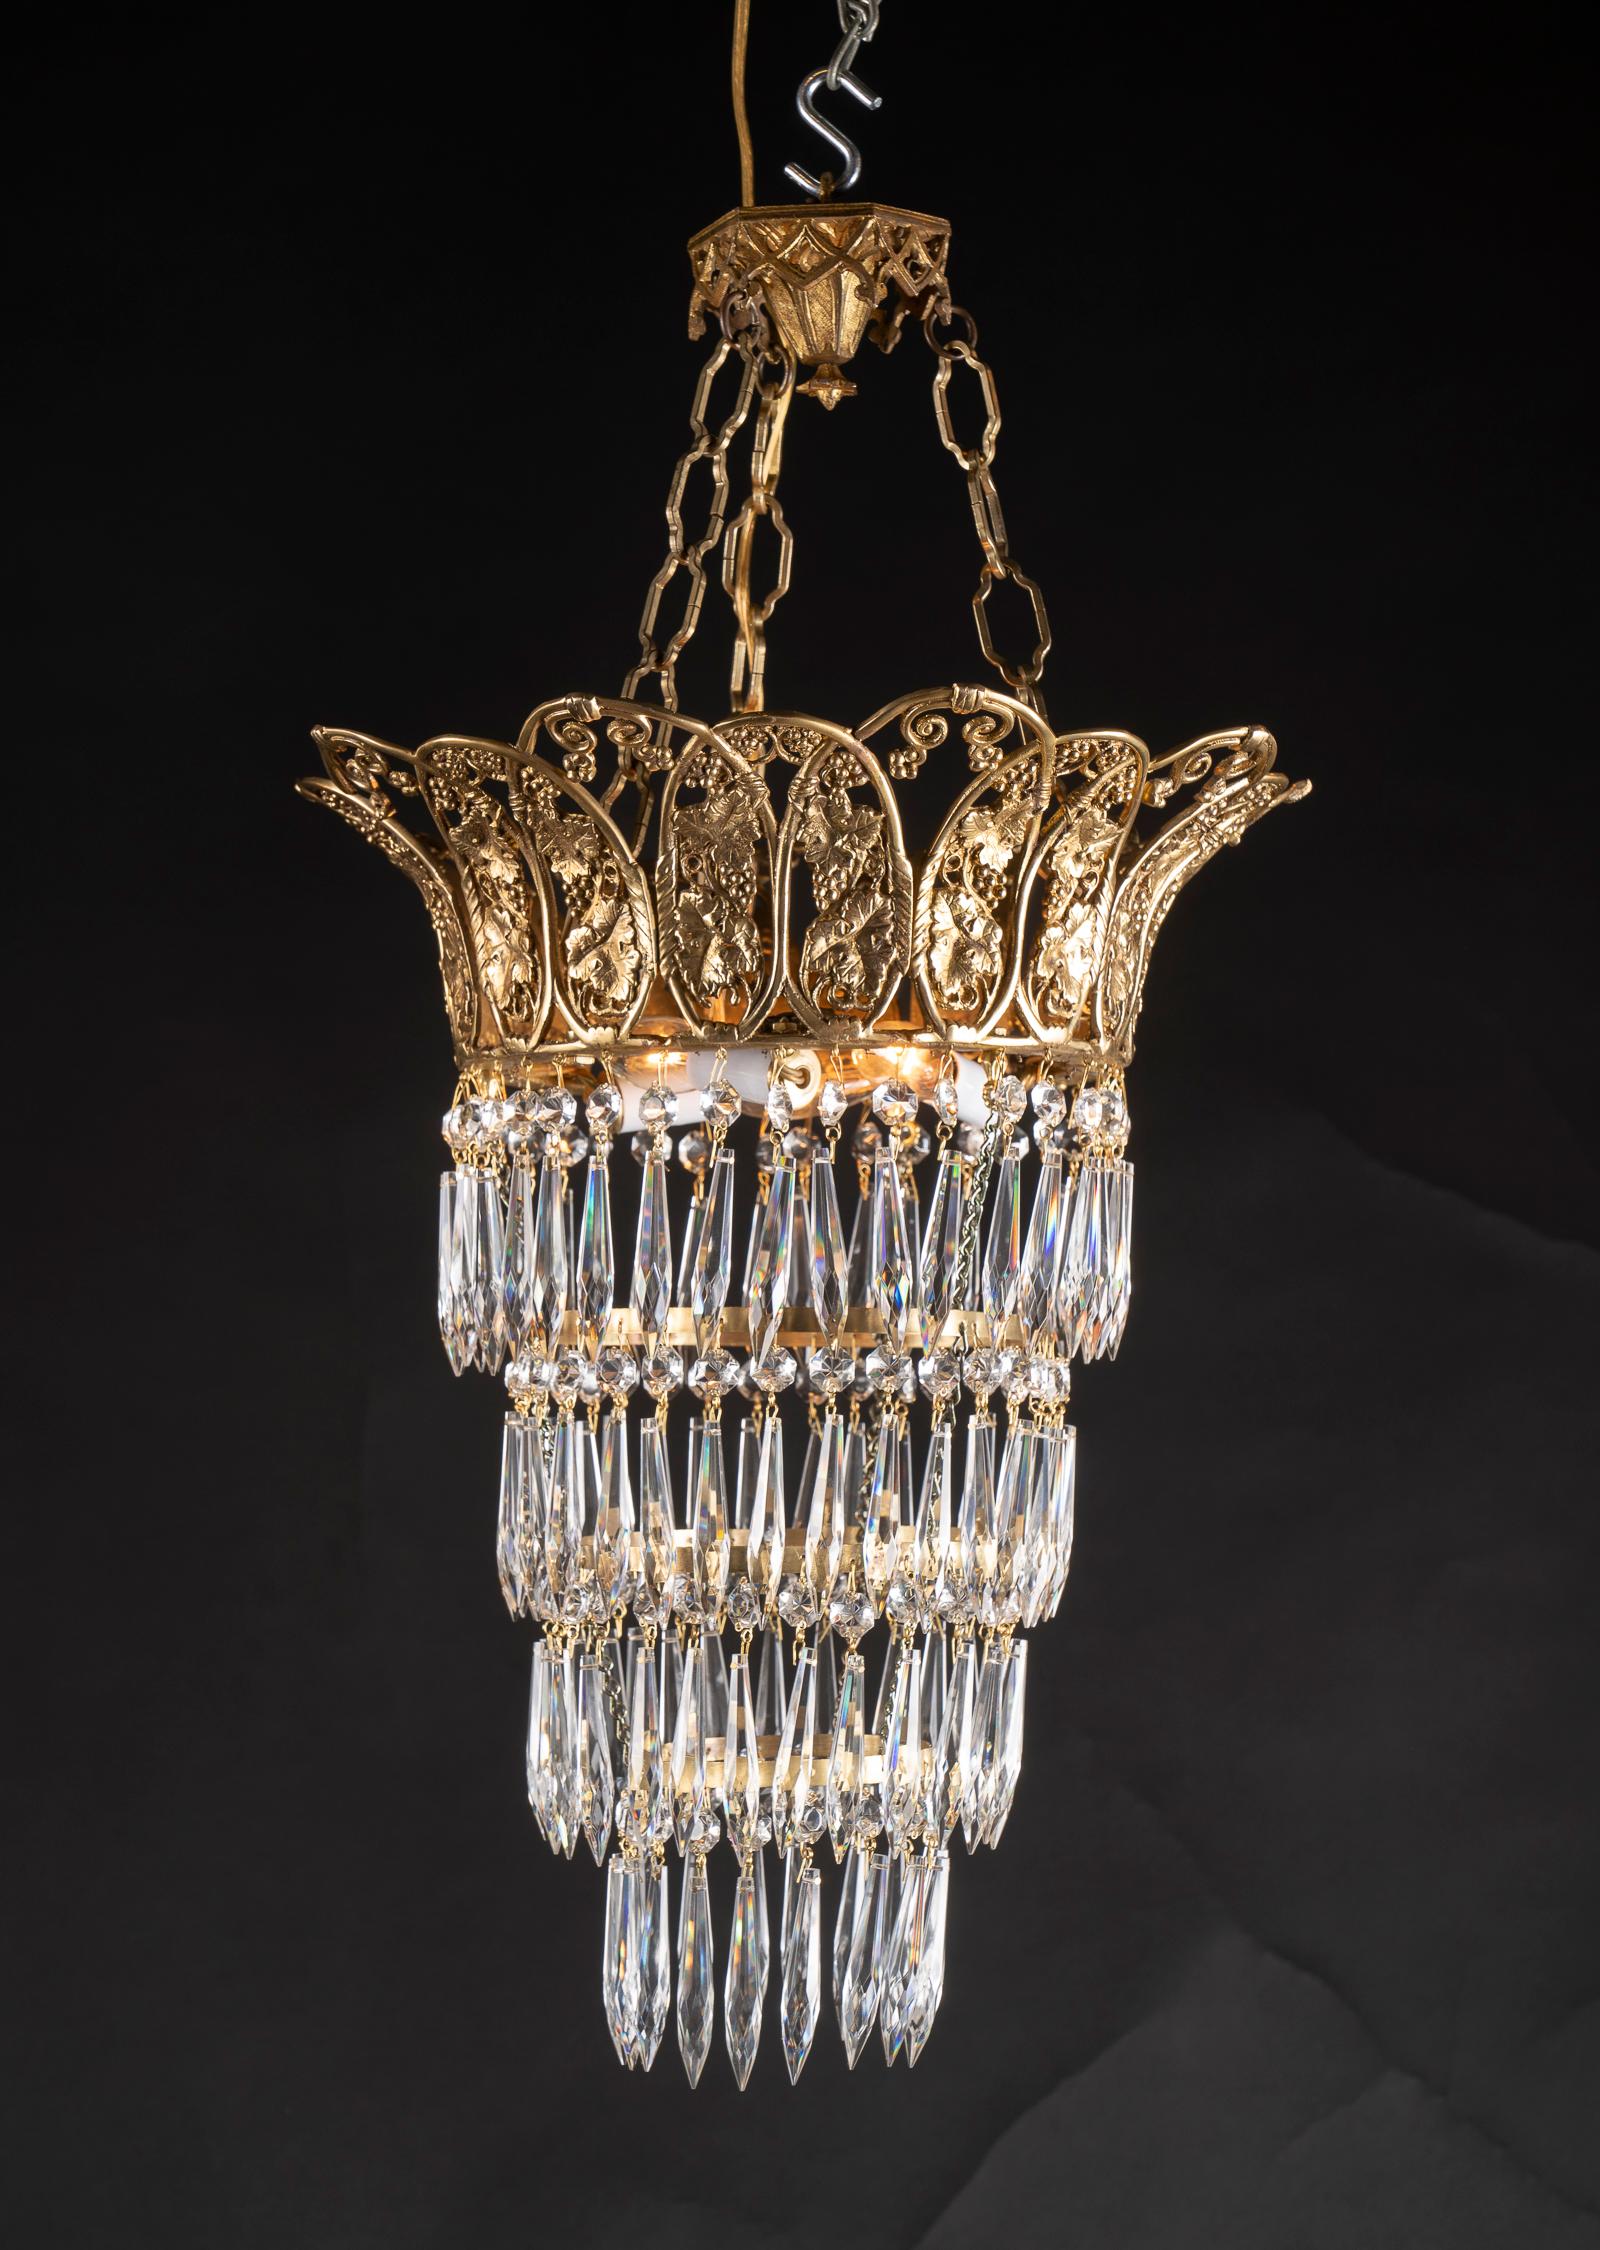 This beautiful pair of Louis XVI style chandeliers features four spherical tiers of crystals suspended from a detailed bronze crown at top. The crown carries a grape motif in reference to Bacchus the god of wine, and dates back to the late 19th